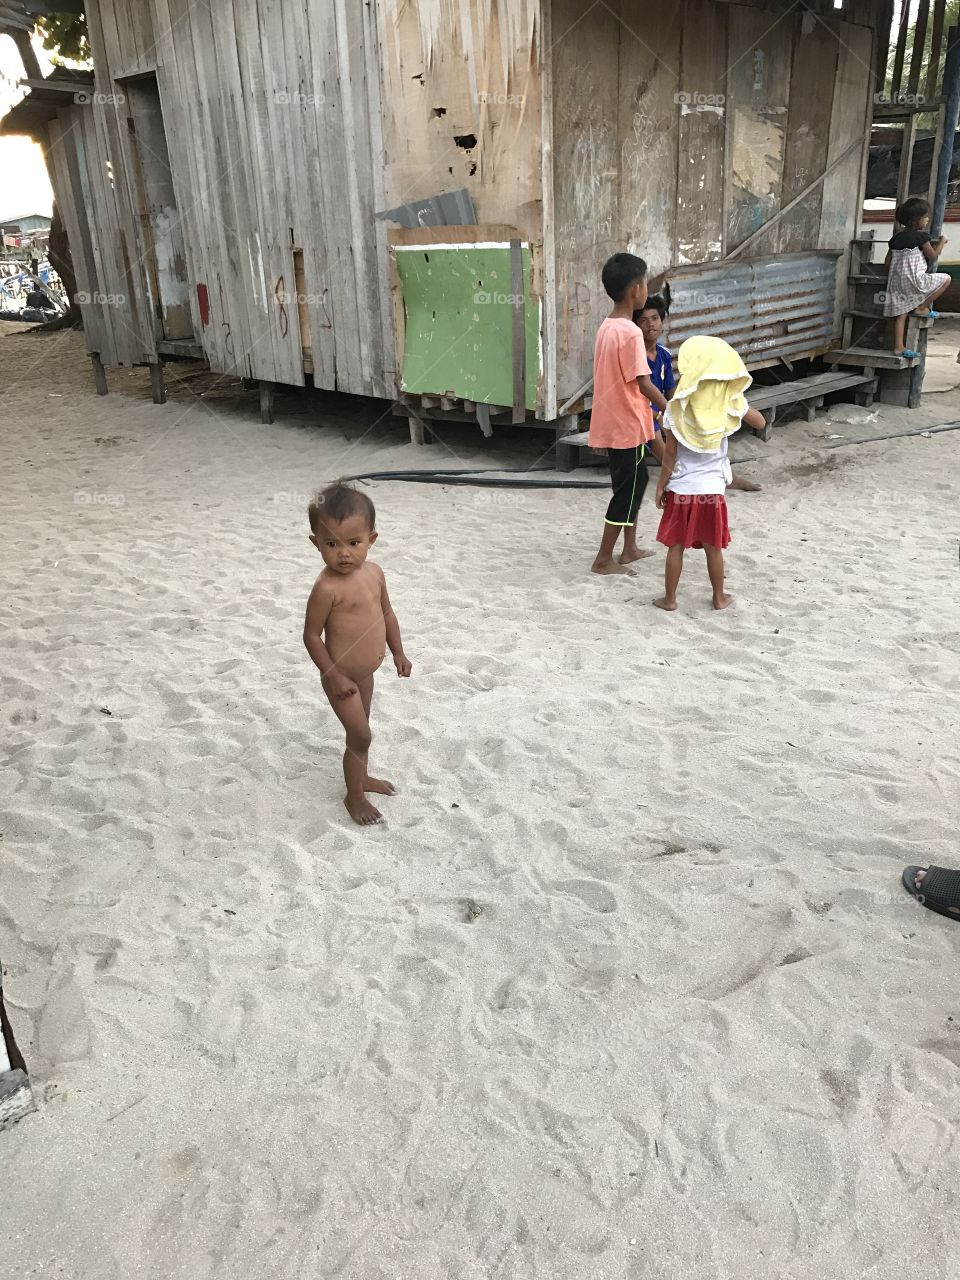 visit at orang bajau laut life at mabul island... the best picture i took... pure kids that naver know about the gajet world..